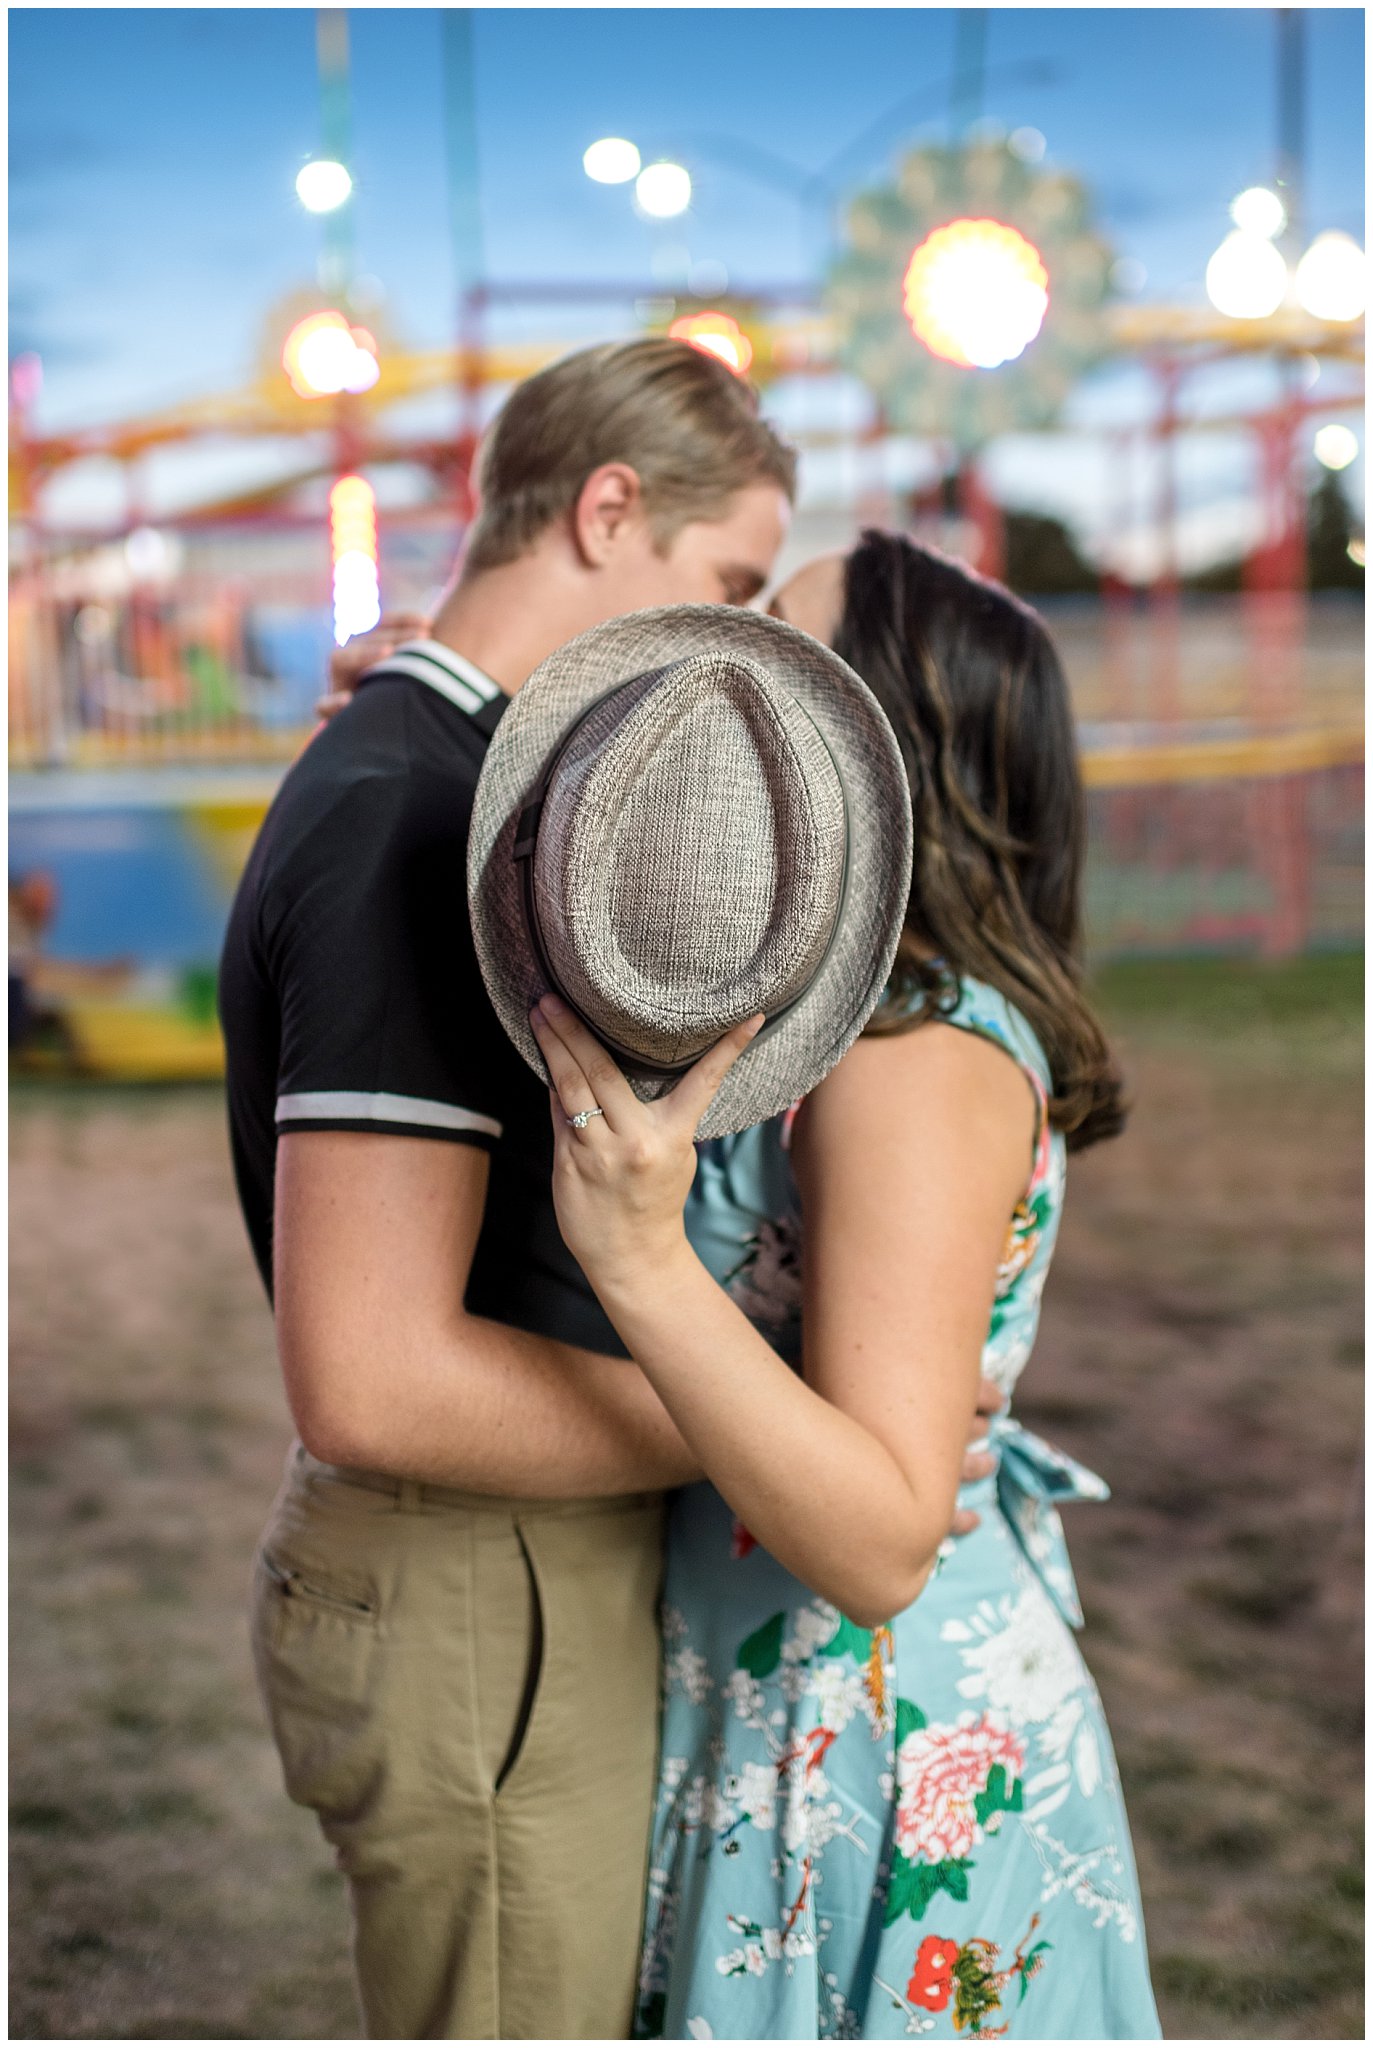 Couple kisses behind fedora hat during their carnival engagement session at the state fair in Utah | Jessie and Dallin Photography | Utah Wedding Photographers